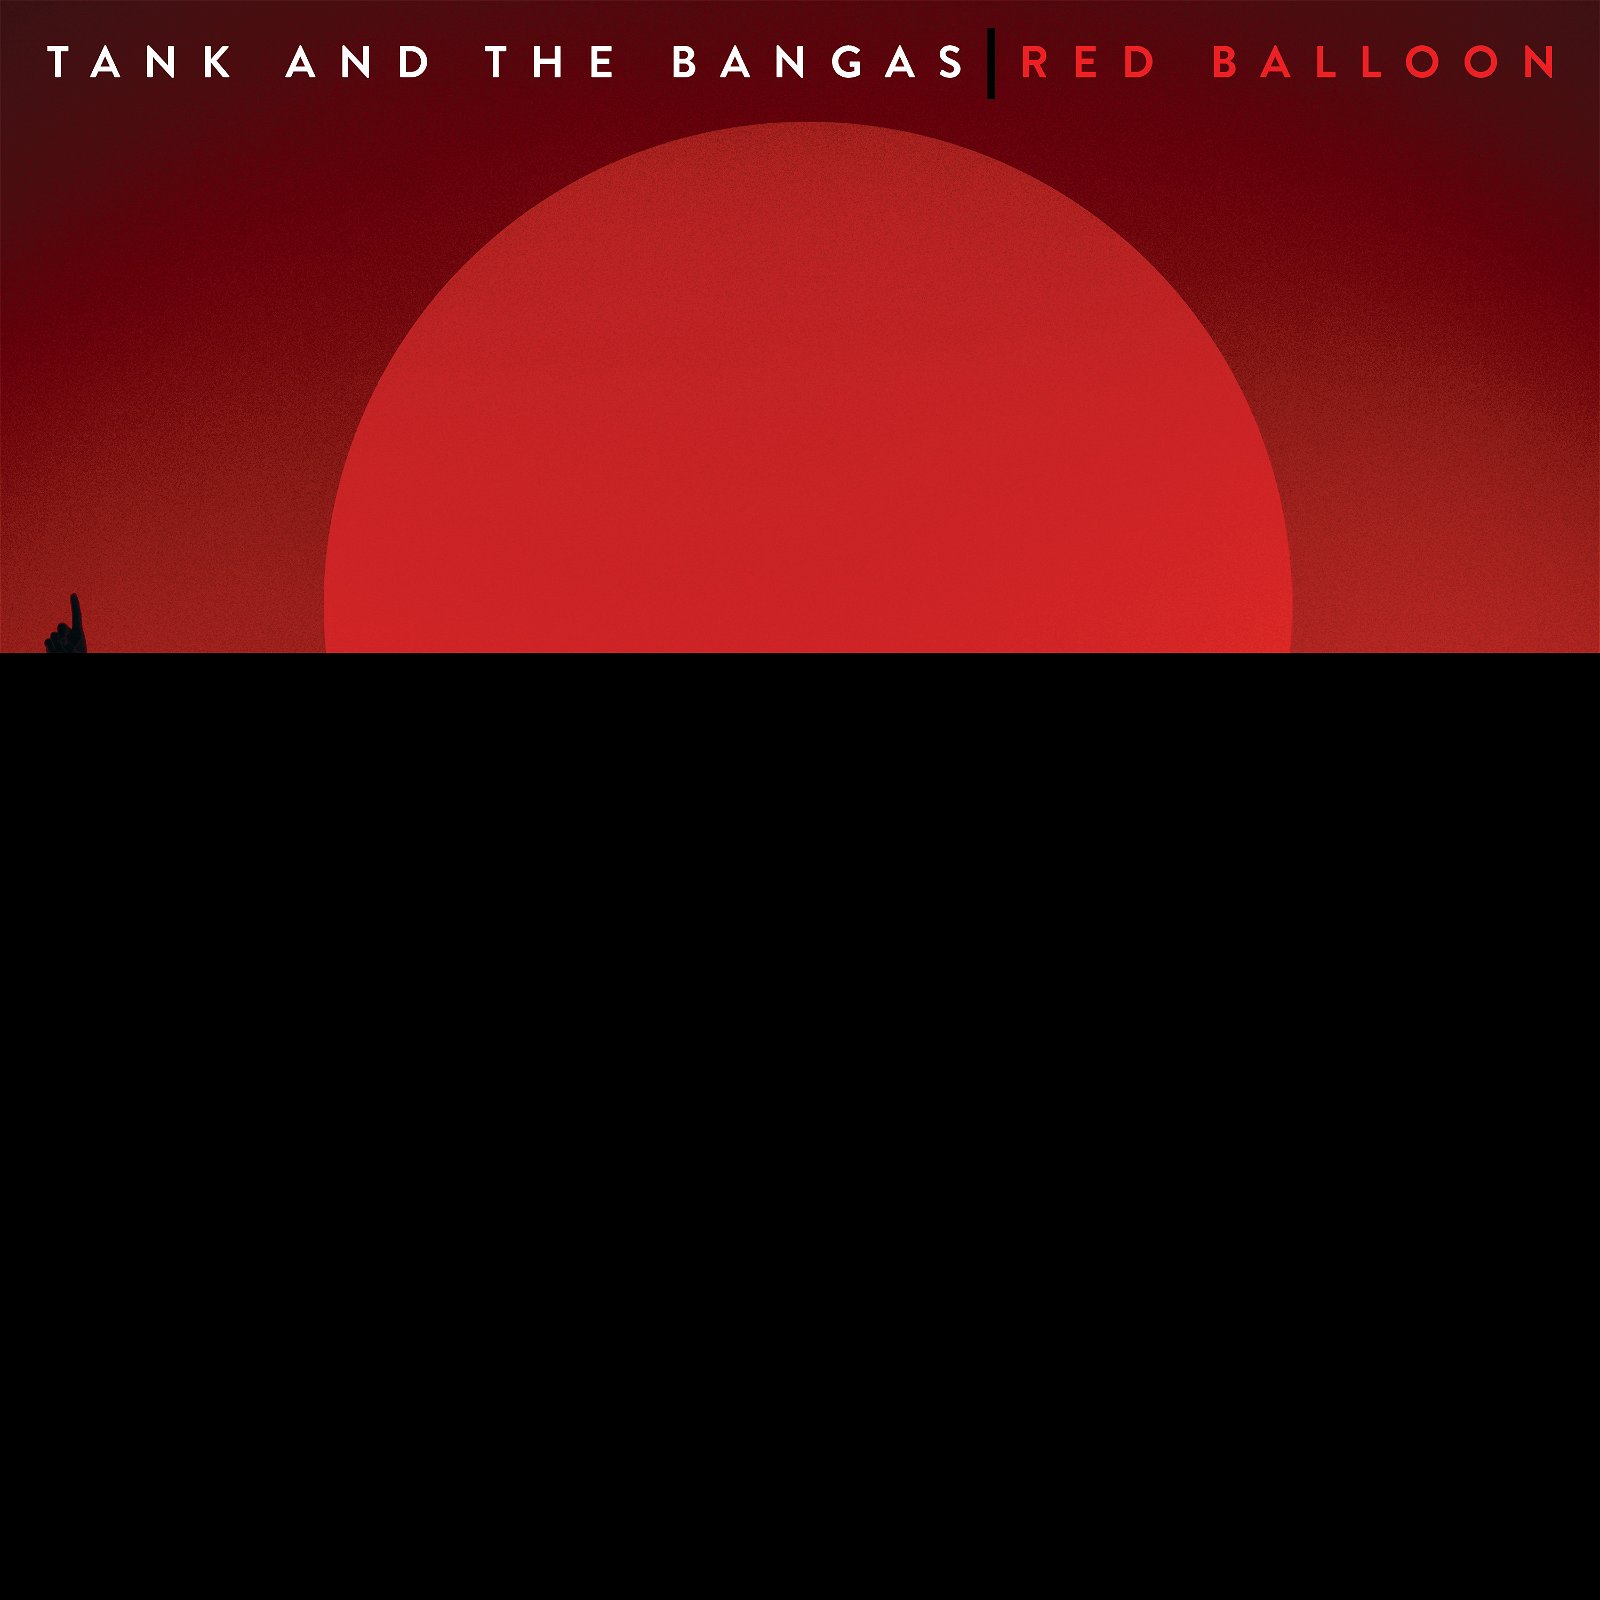 TANK AND THE BANGAS - Red Balloon, Vinyl